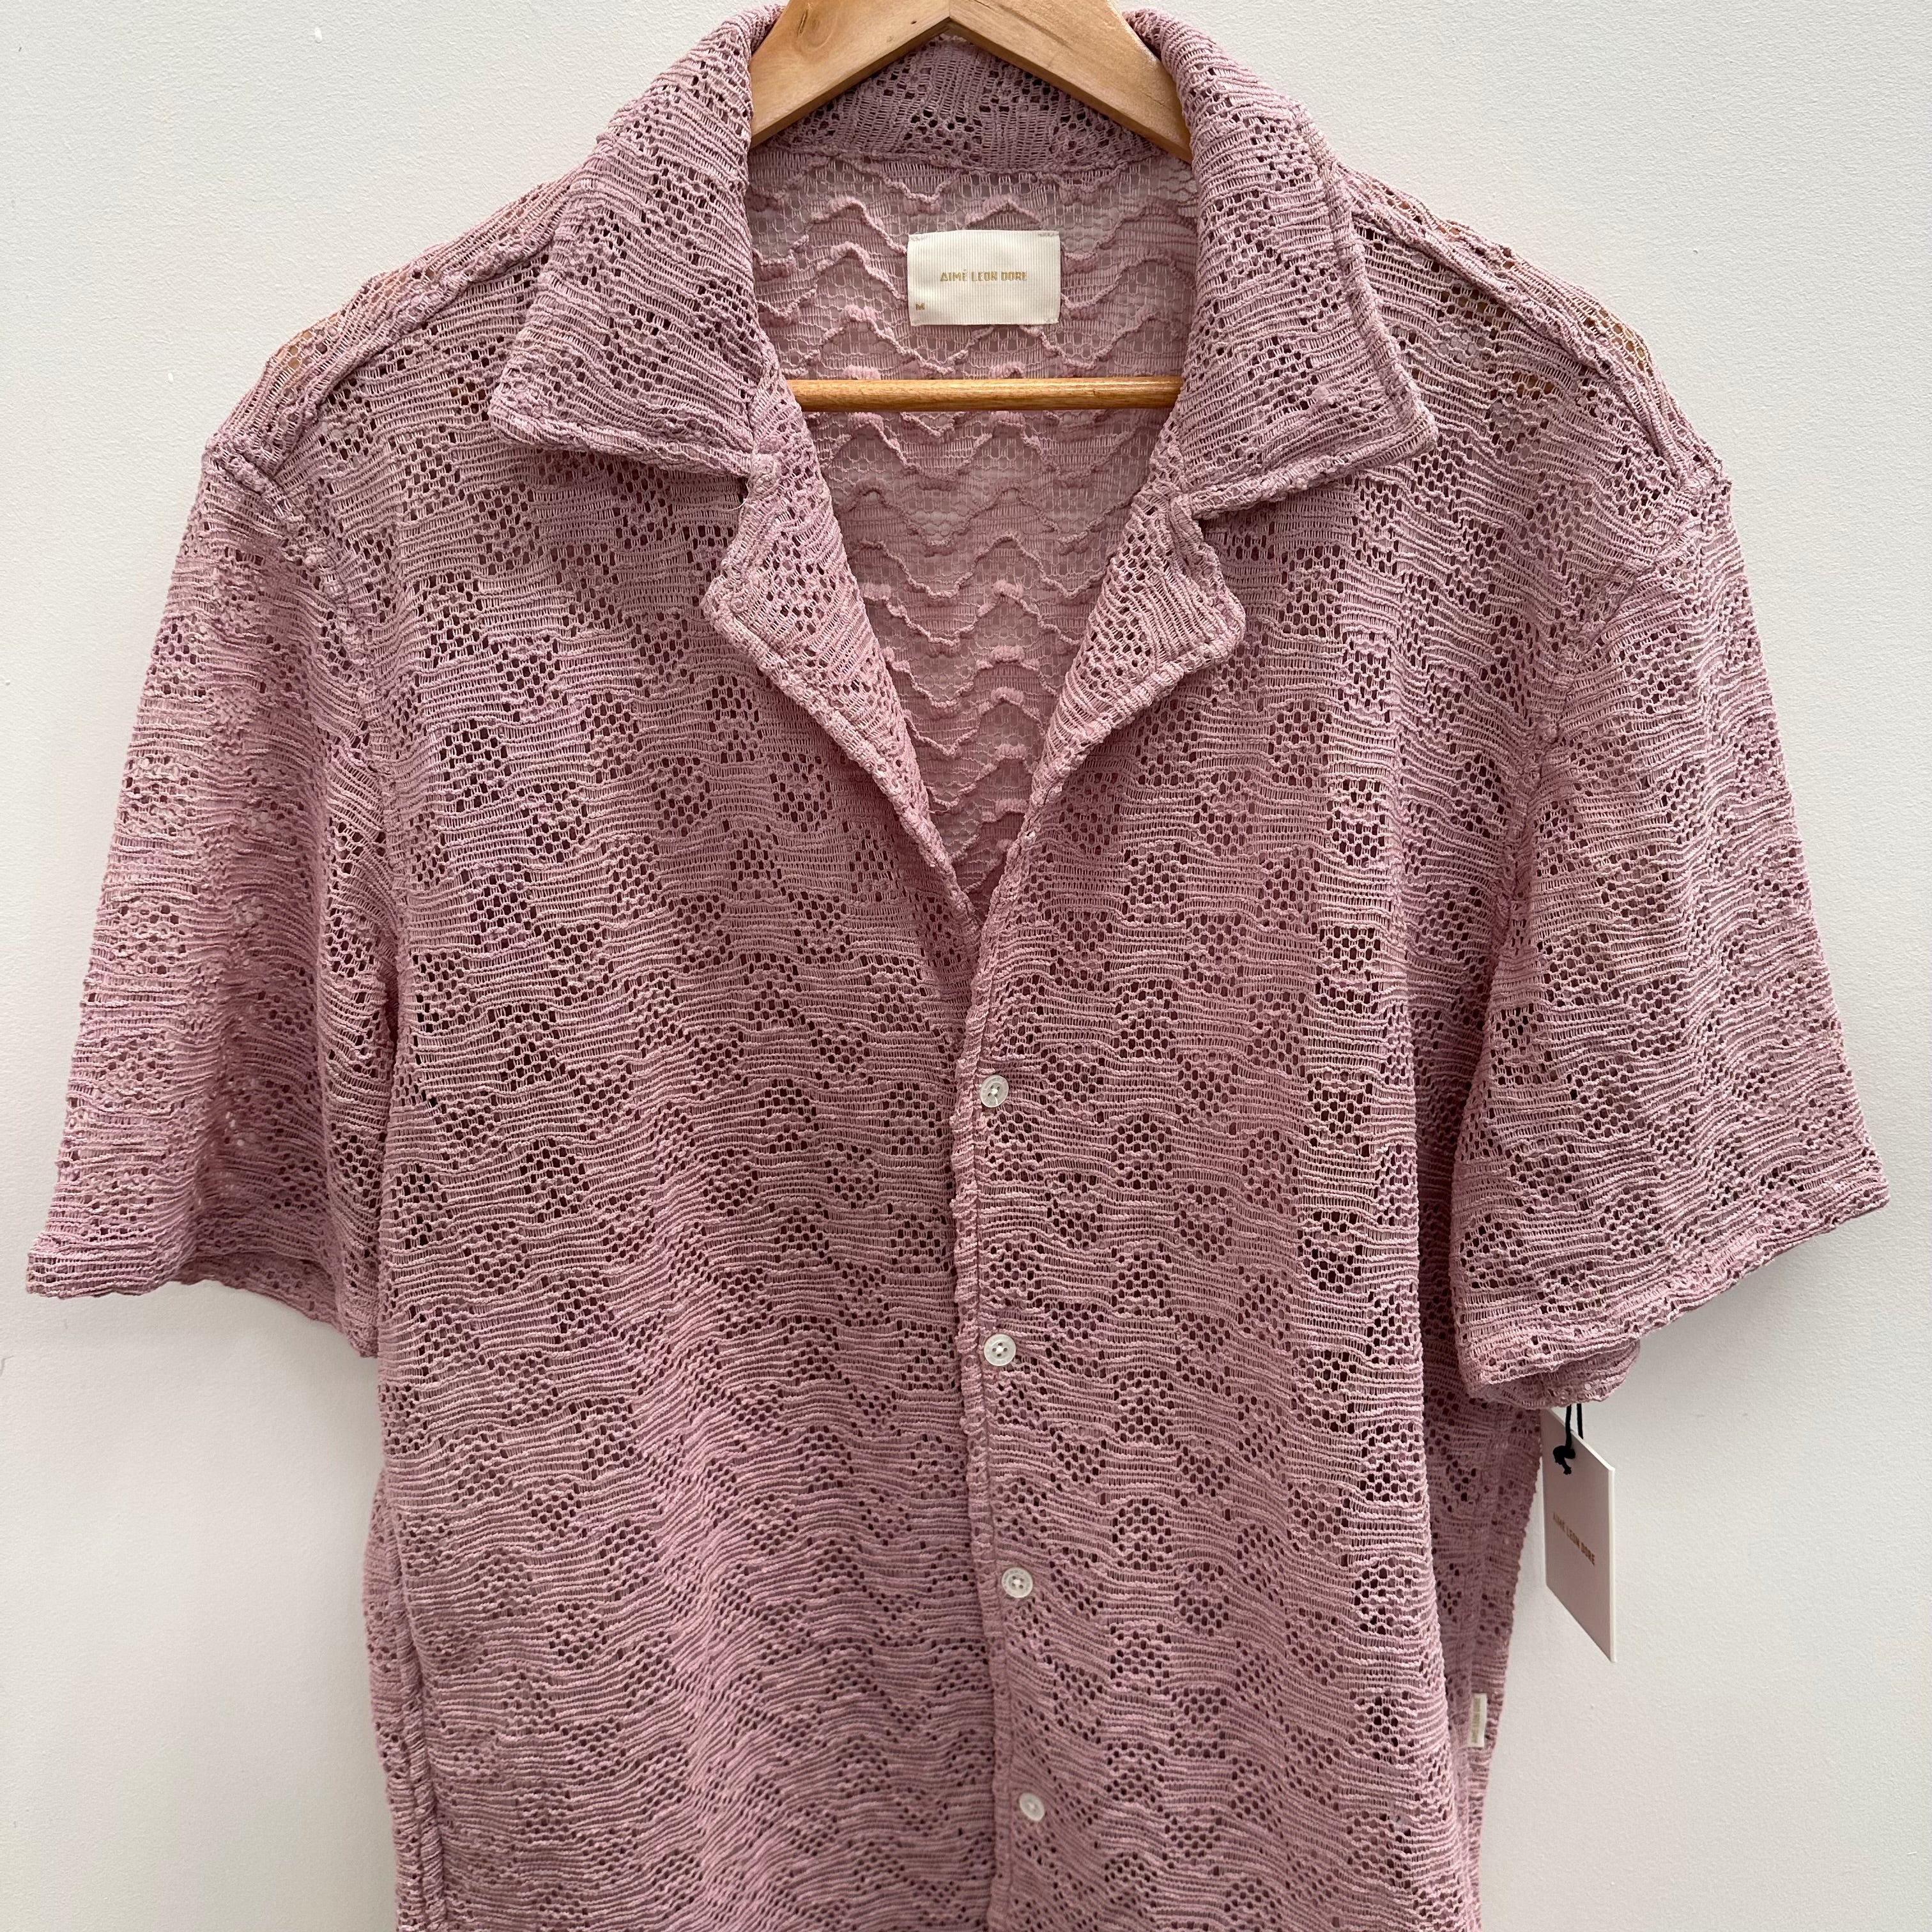 Aime Leon Dore Rico Shirt Purple Size M – Curated by Charbel